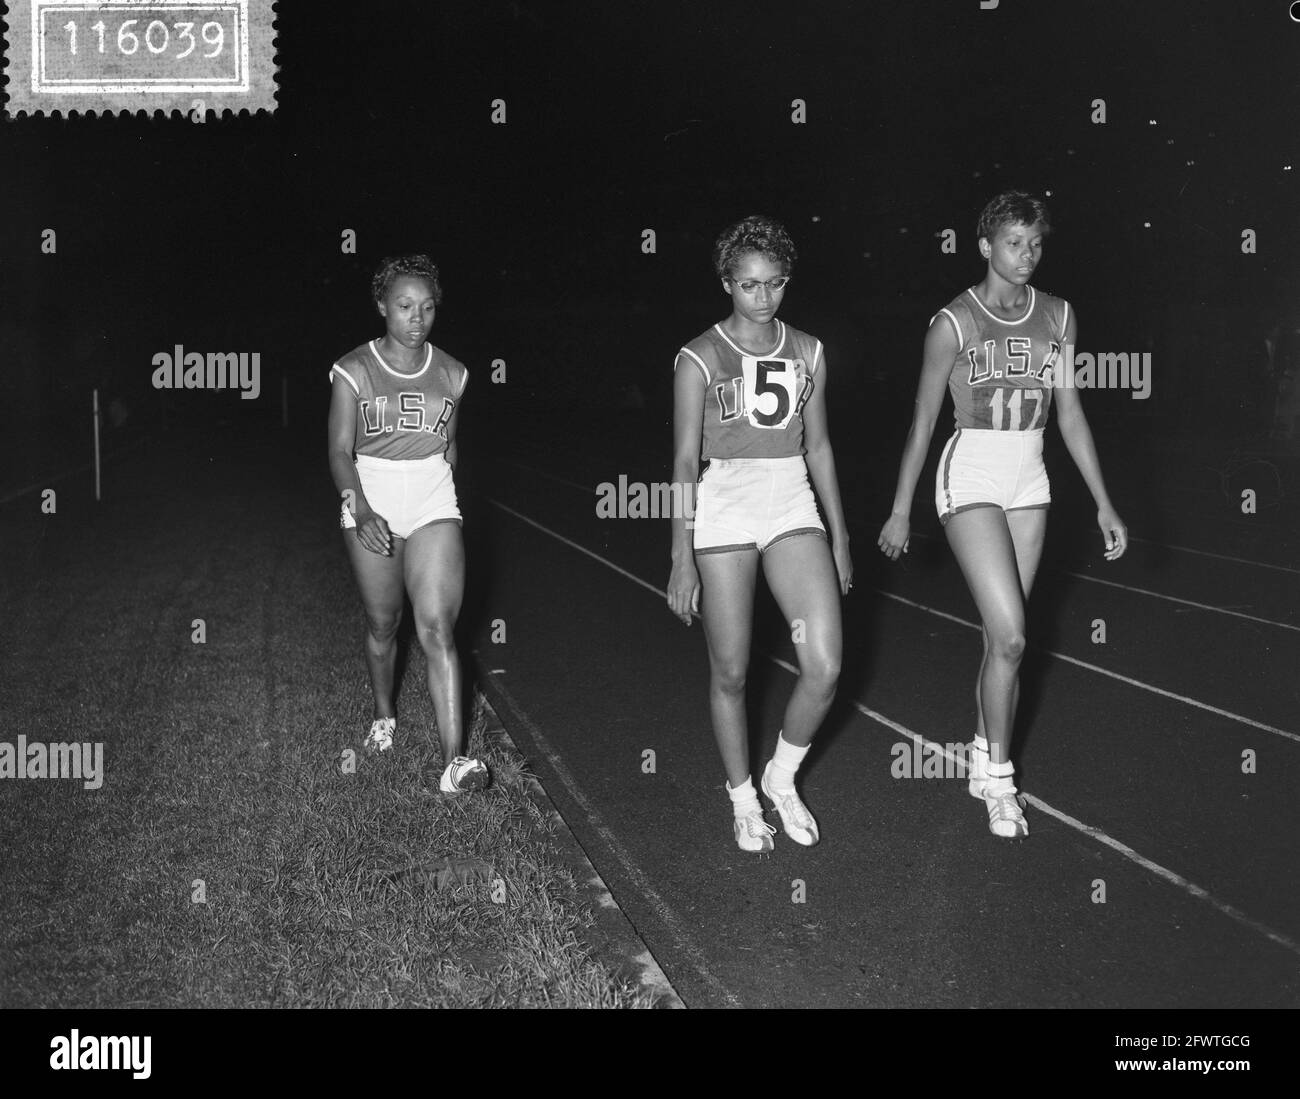 Olympic revances in stadium Amsterdam, Wilma Rudolph, September 15, 1960, athletics, The Netherlands, 20th century press agency photo, news to remember, documentary, historic photography 1945-1990, visual stories, human history of the Twentieth Century, capturing moments in time Stock Photo